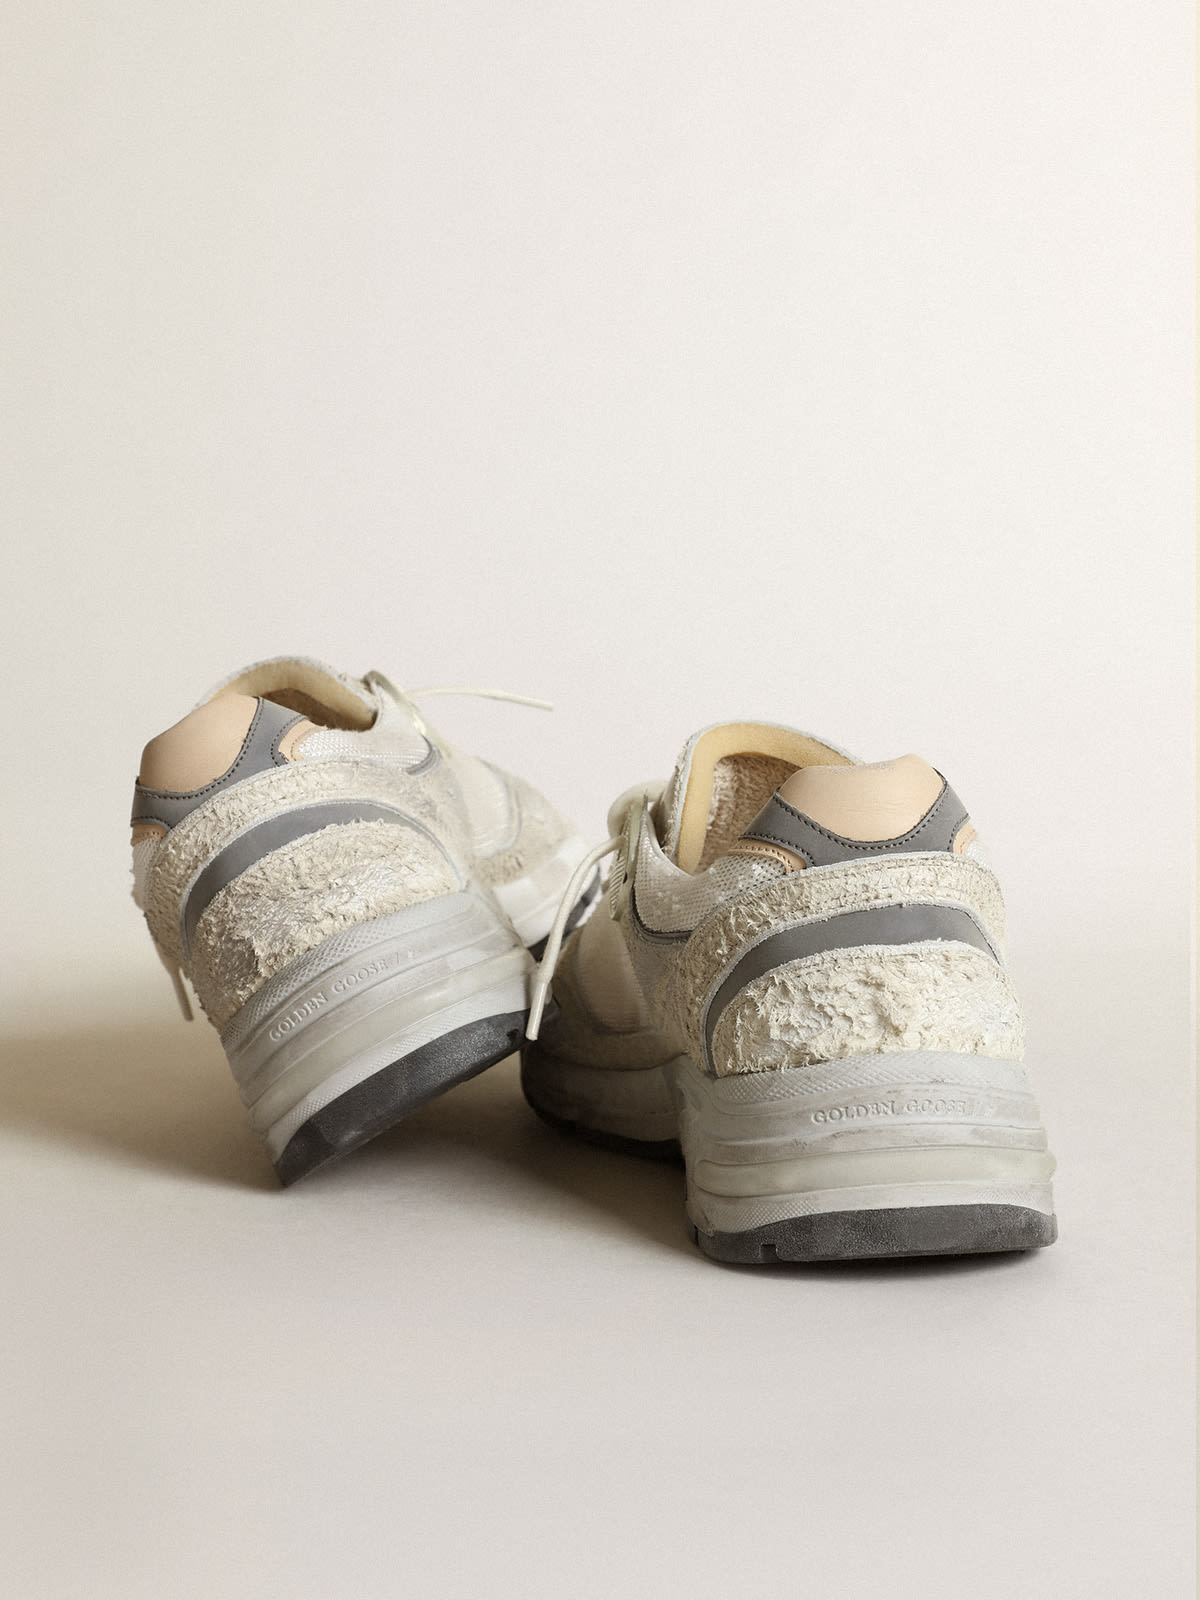 Golden Goose - Dad-Star sneakers in white and gray suede with white leather star in 